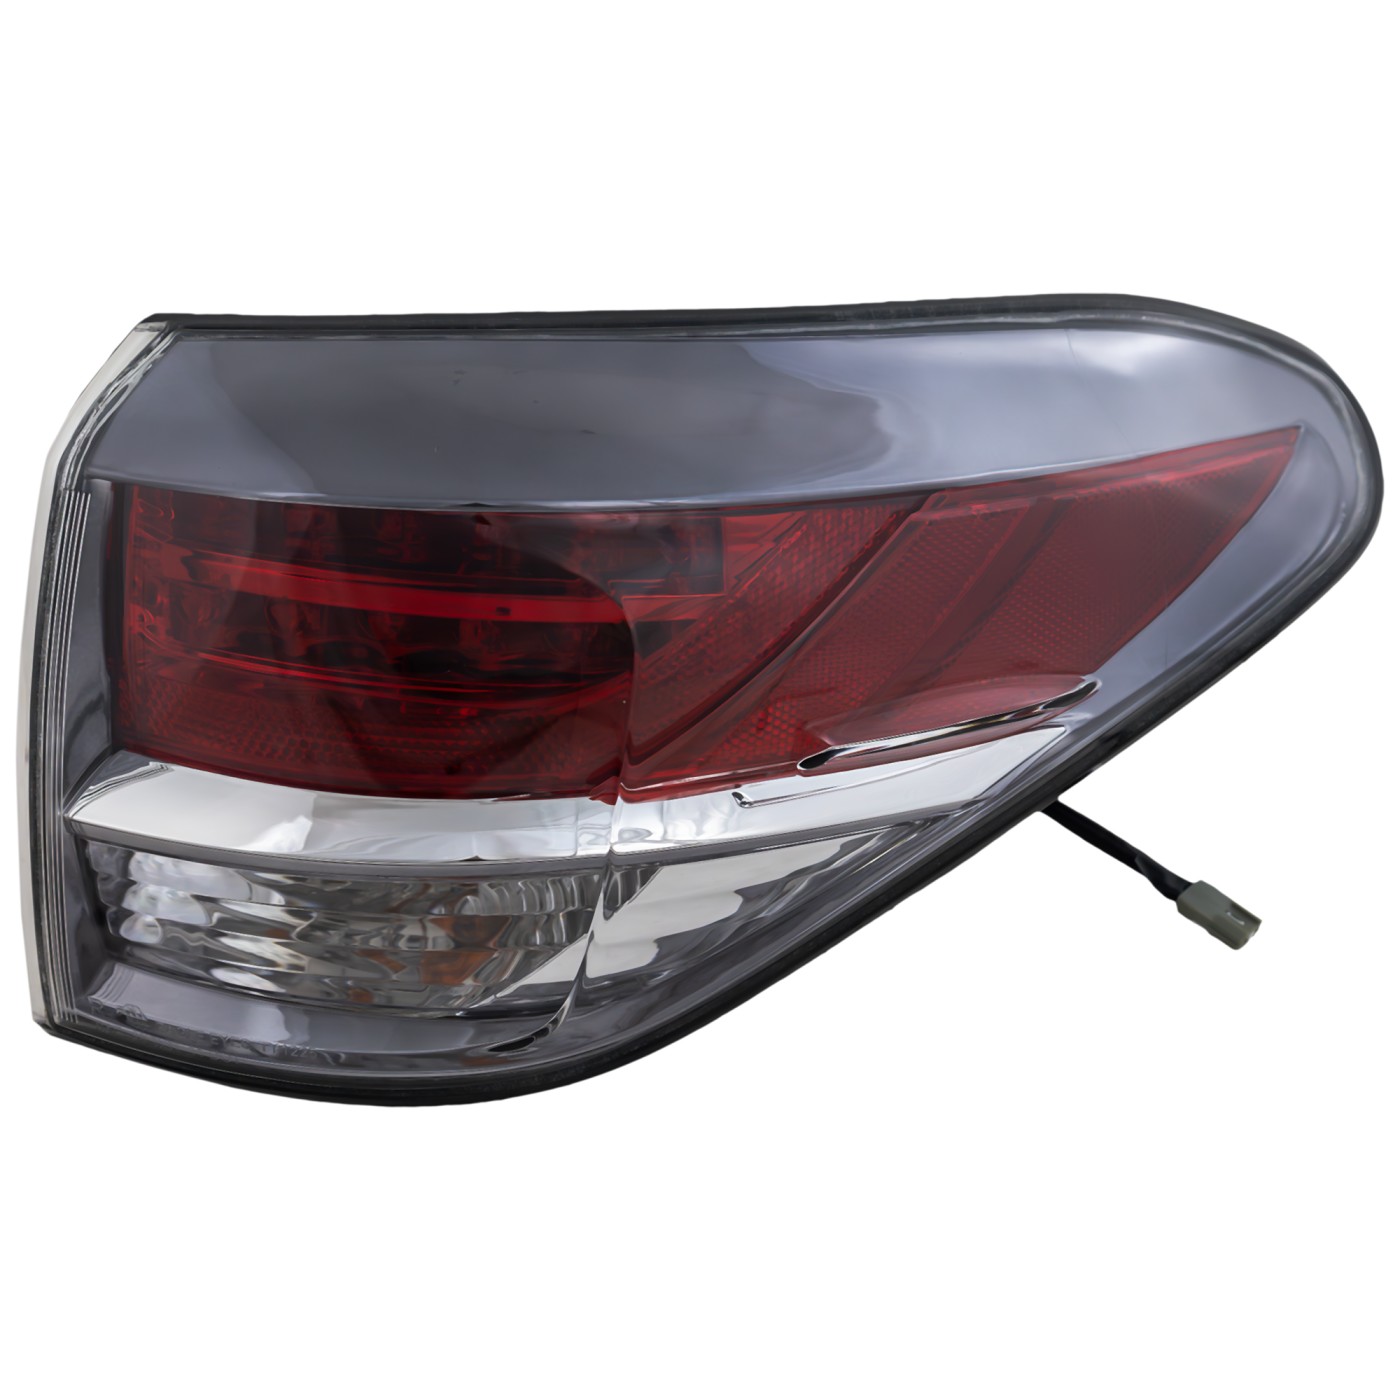 Tail Light For 2013-2015 Lexus RX350 Assembly Canada Built Right Outer | eBay